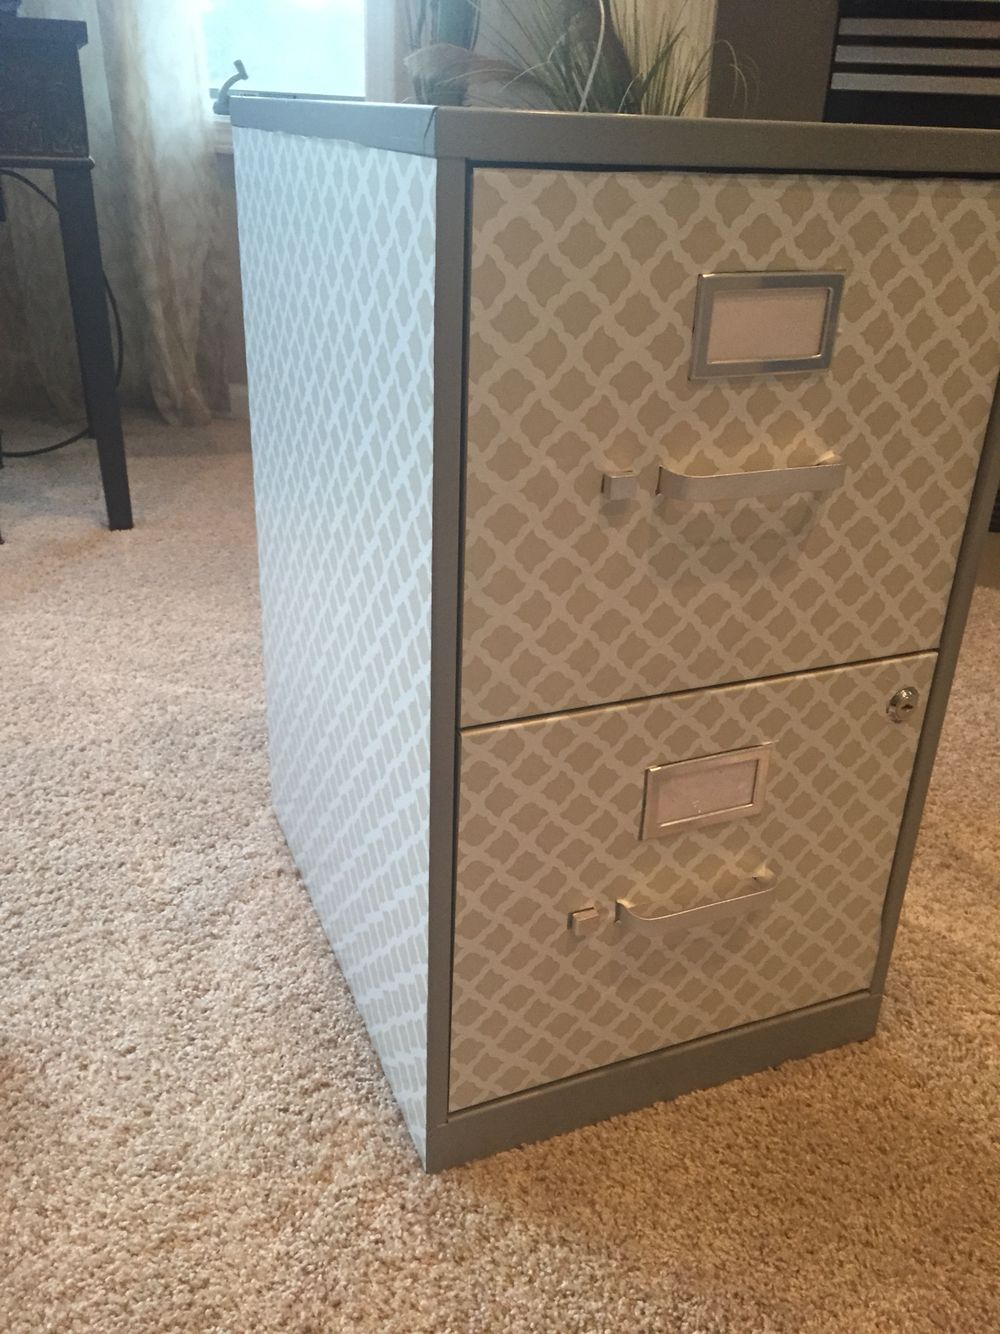 Covered A Basic Filing Cabinet With Contact Paper So Chic with sizing 1000 X 1334